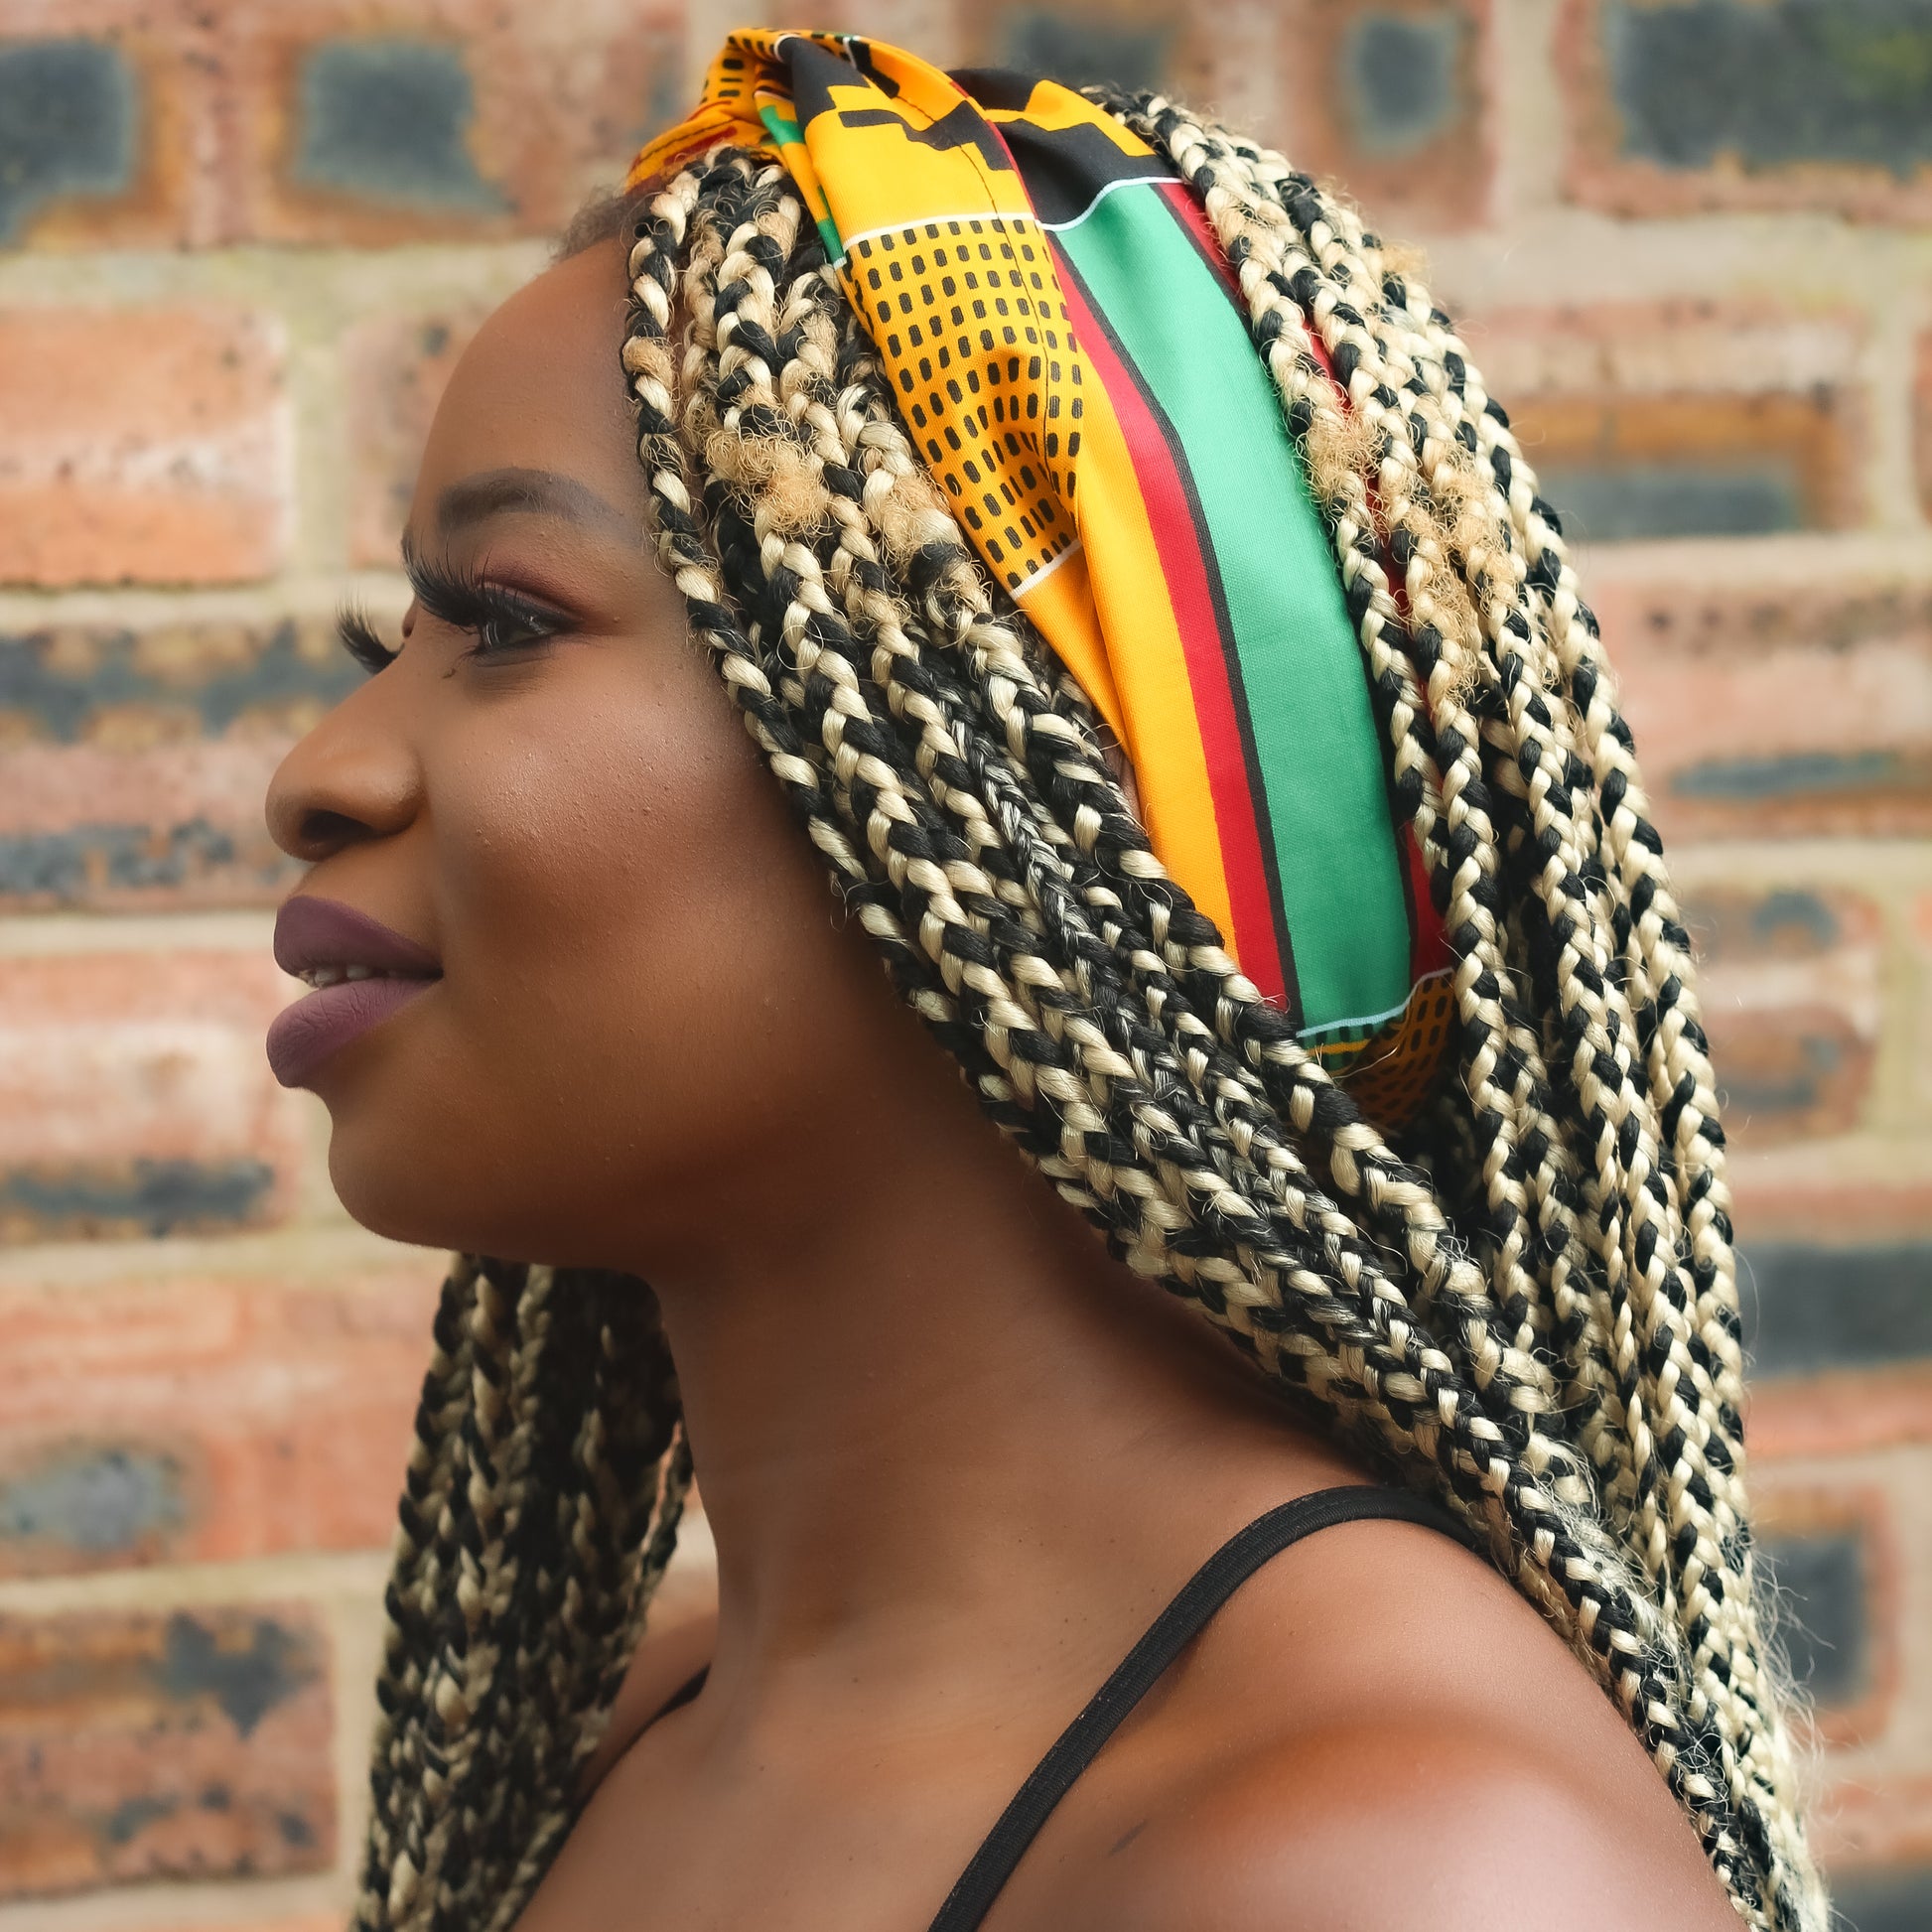 ellow, green, red, and black African print head wrap tied as headband in a geo-shaped pattern, made from sustainably sourced Ankara wax print.